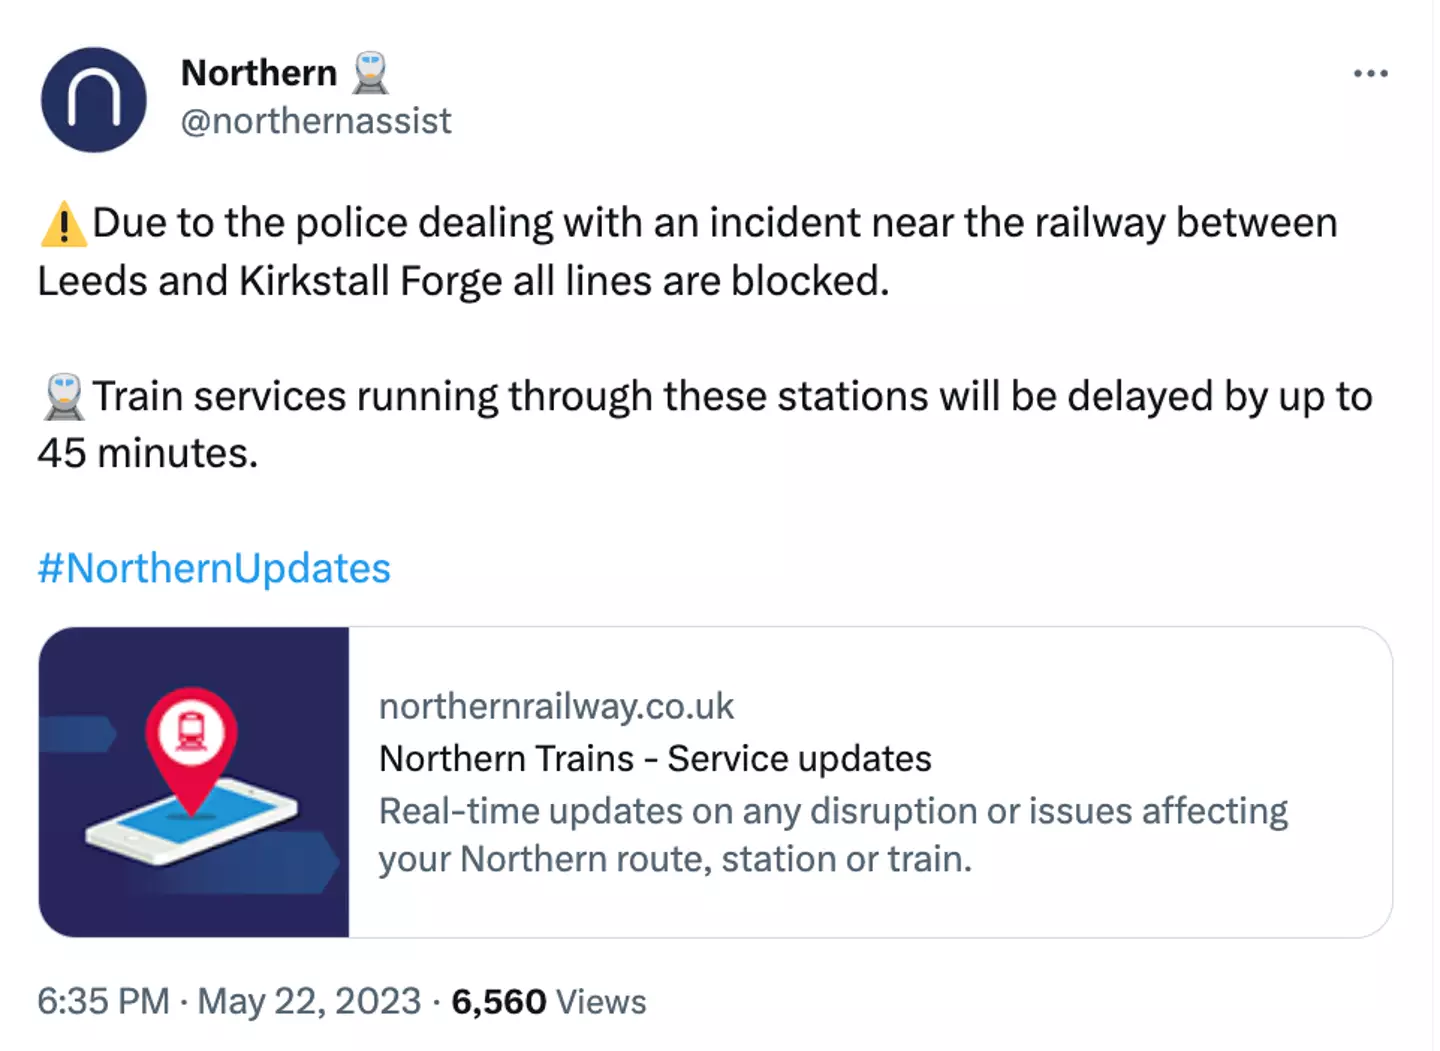 Northern Rail released an announcement on Twitter.